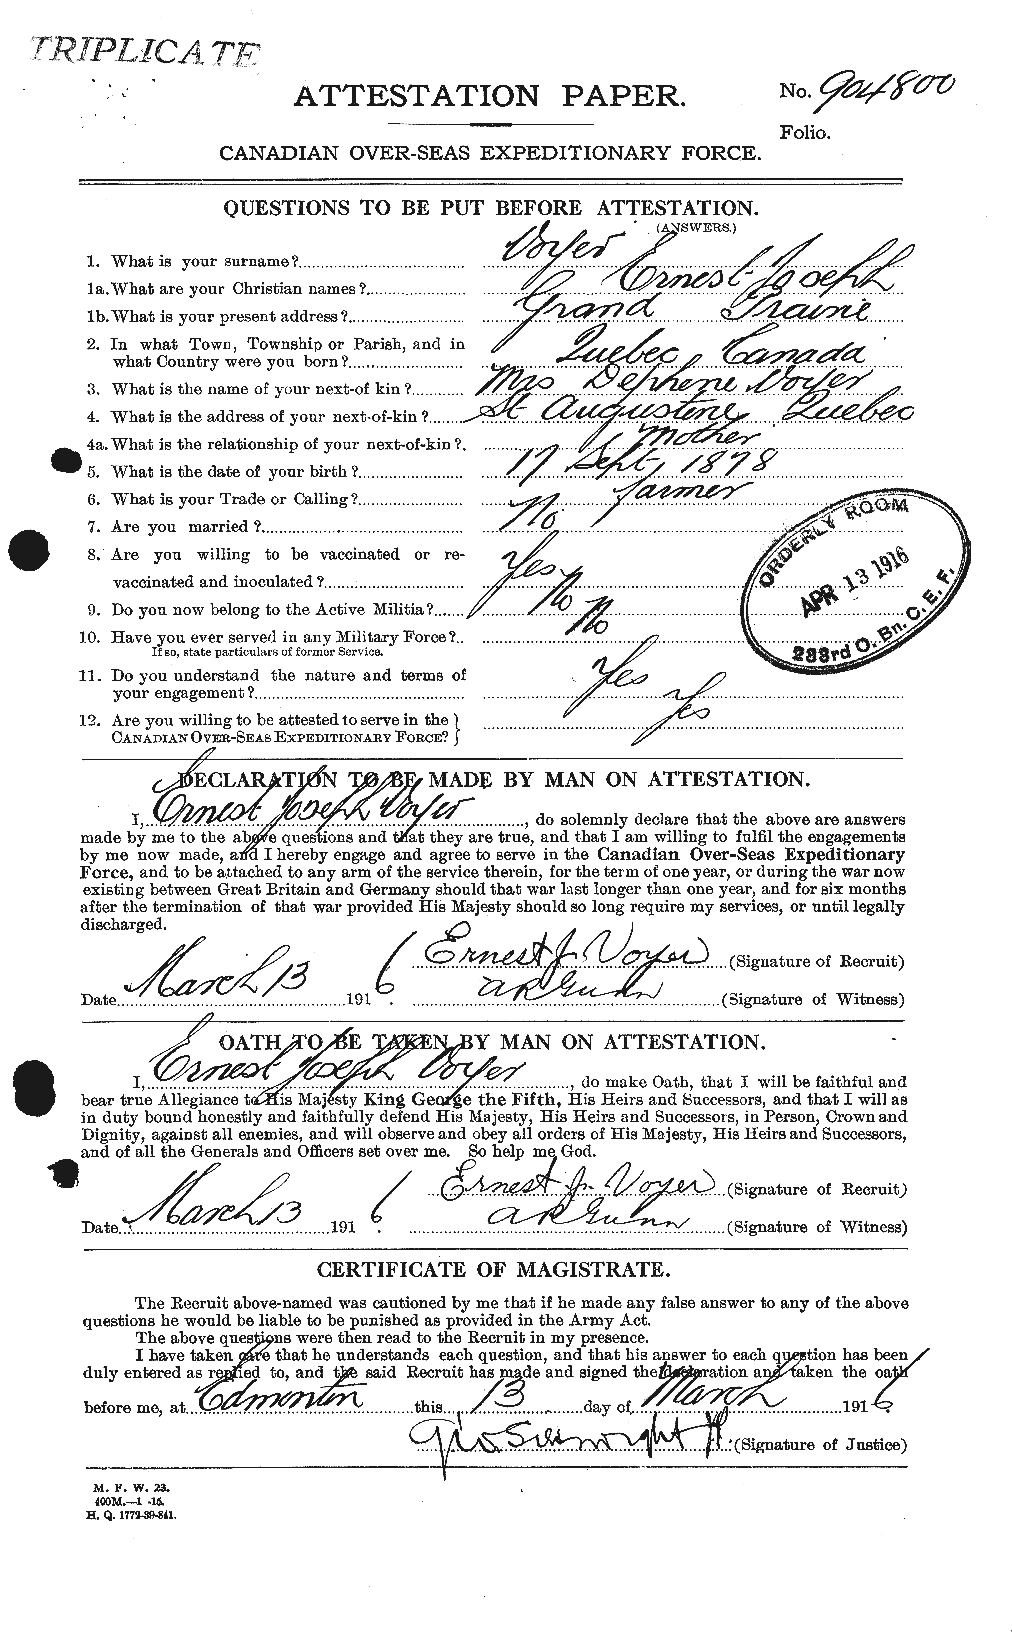 Personnel Records of the First World War - CEF 652482a